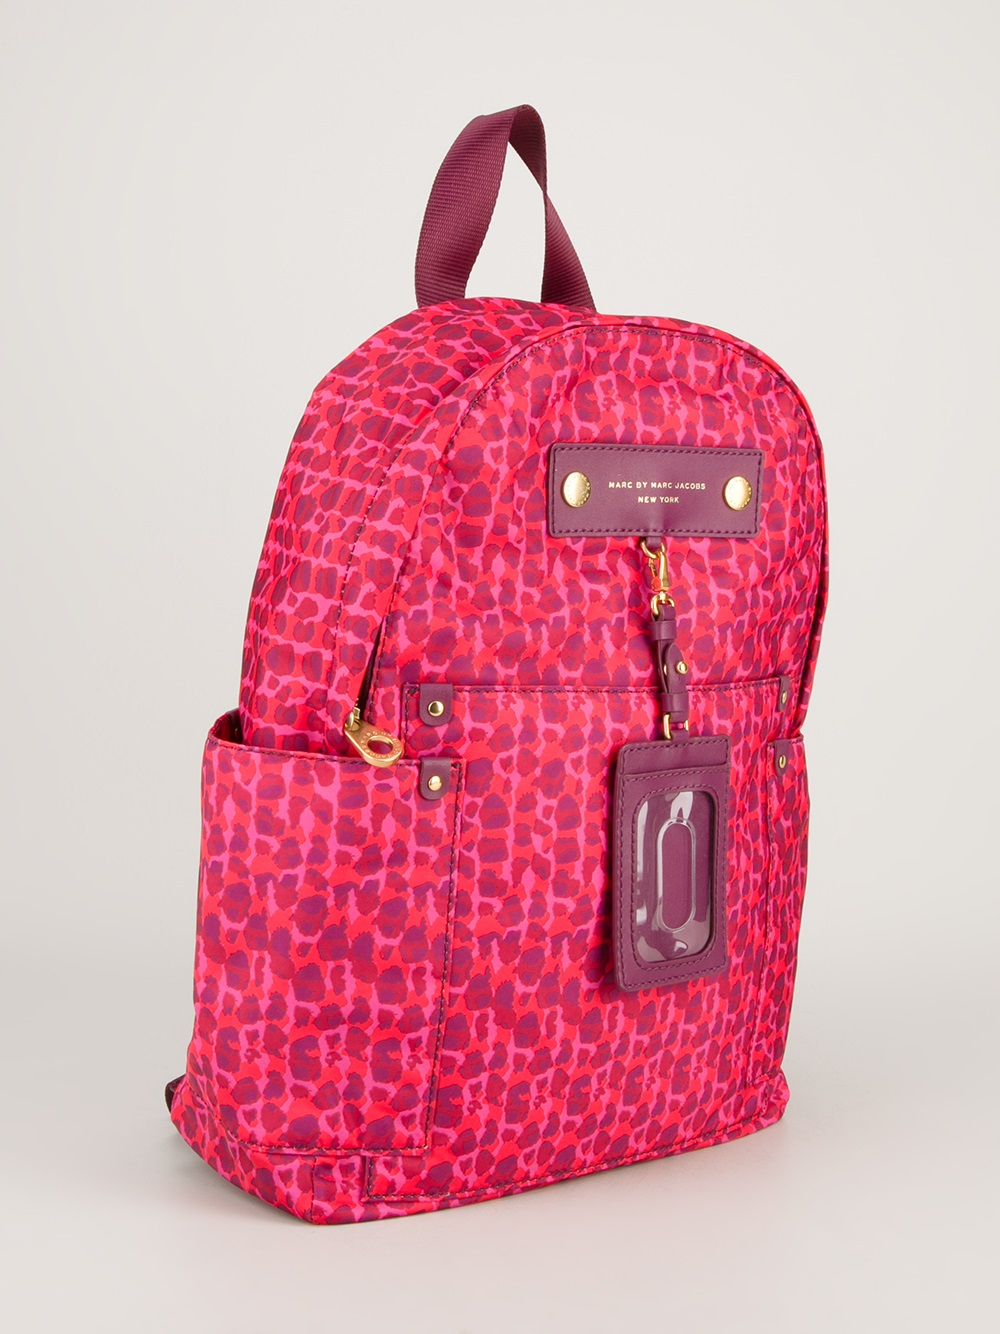 Marc by marc jacobs Preppy Printed Backpack in Pink | Lyst